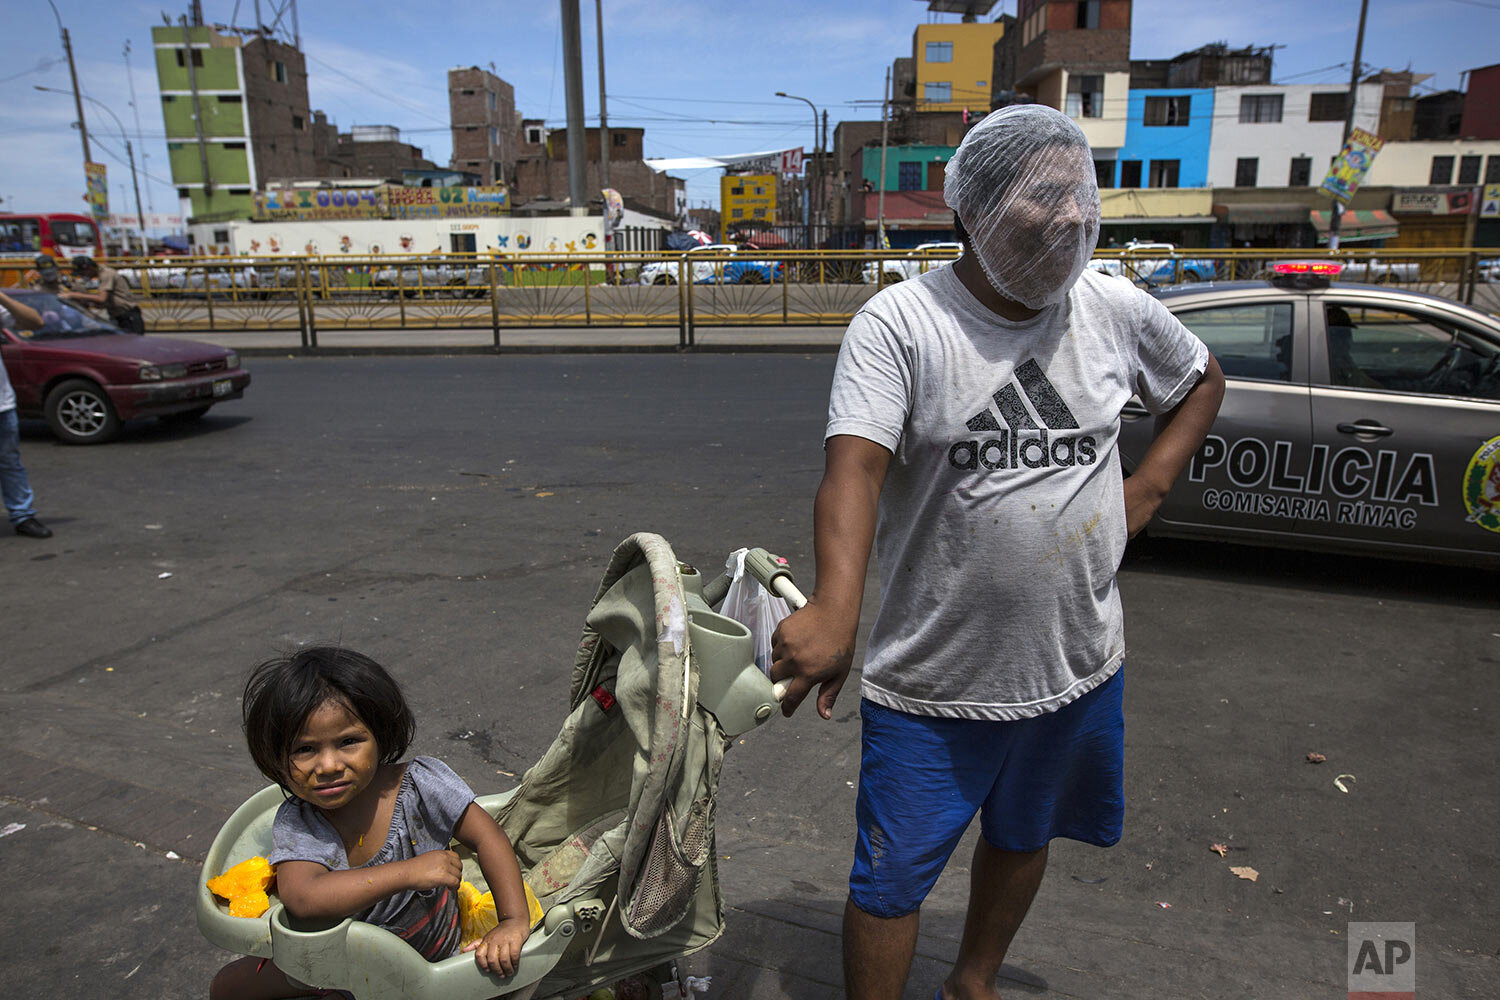  In this March 19, 2020 photo, Luis Mendoza jokingly dons a hair net over his face given to him by a group handing out protective gear outside a popular market where he has come to beg for food with his 2-year-old daughter Alejandra, in Lima, Peru. Ê